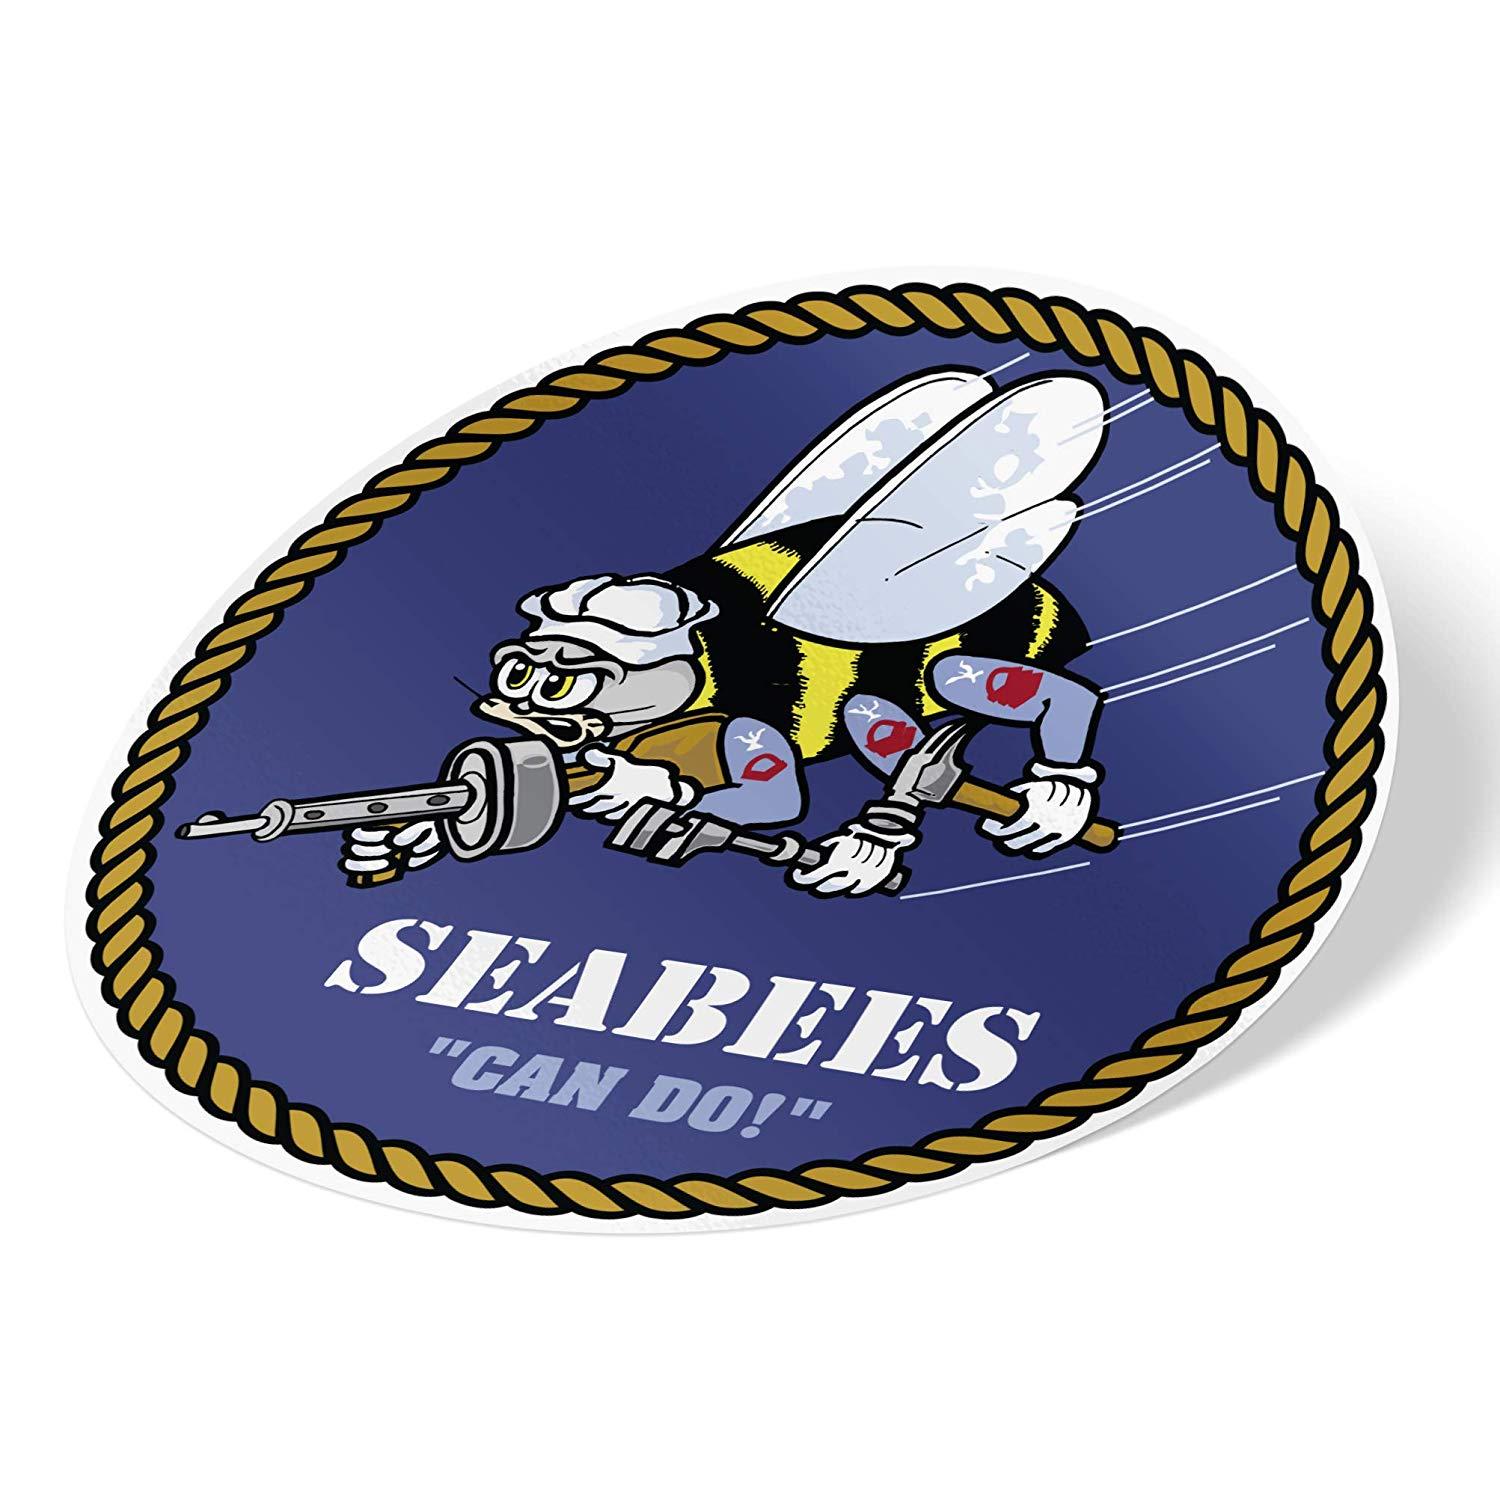 Seabee Logo - US Navy Emblem Logo Sticker Seabees Construction Battalions Vinyl Decal  Laptop Water Bottle Car Scrapbook Officially Licensed United States - Seabee